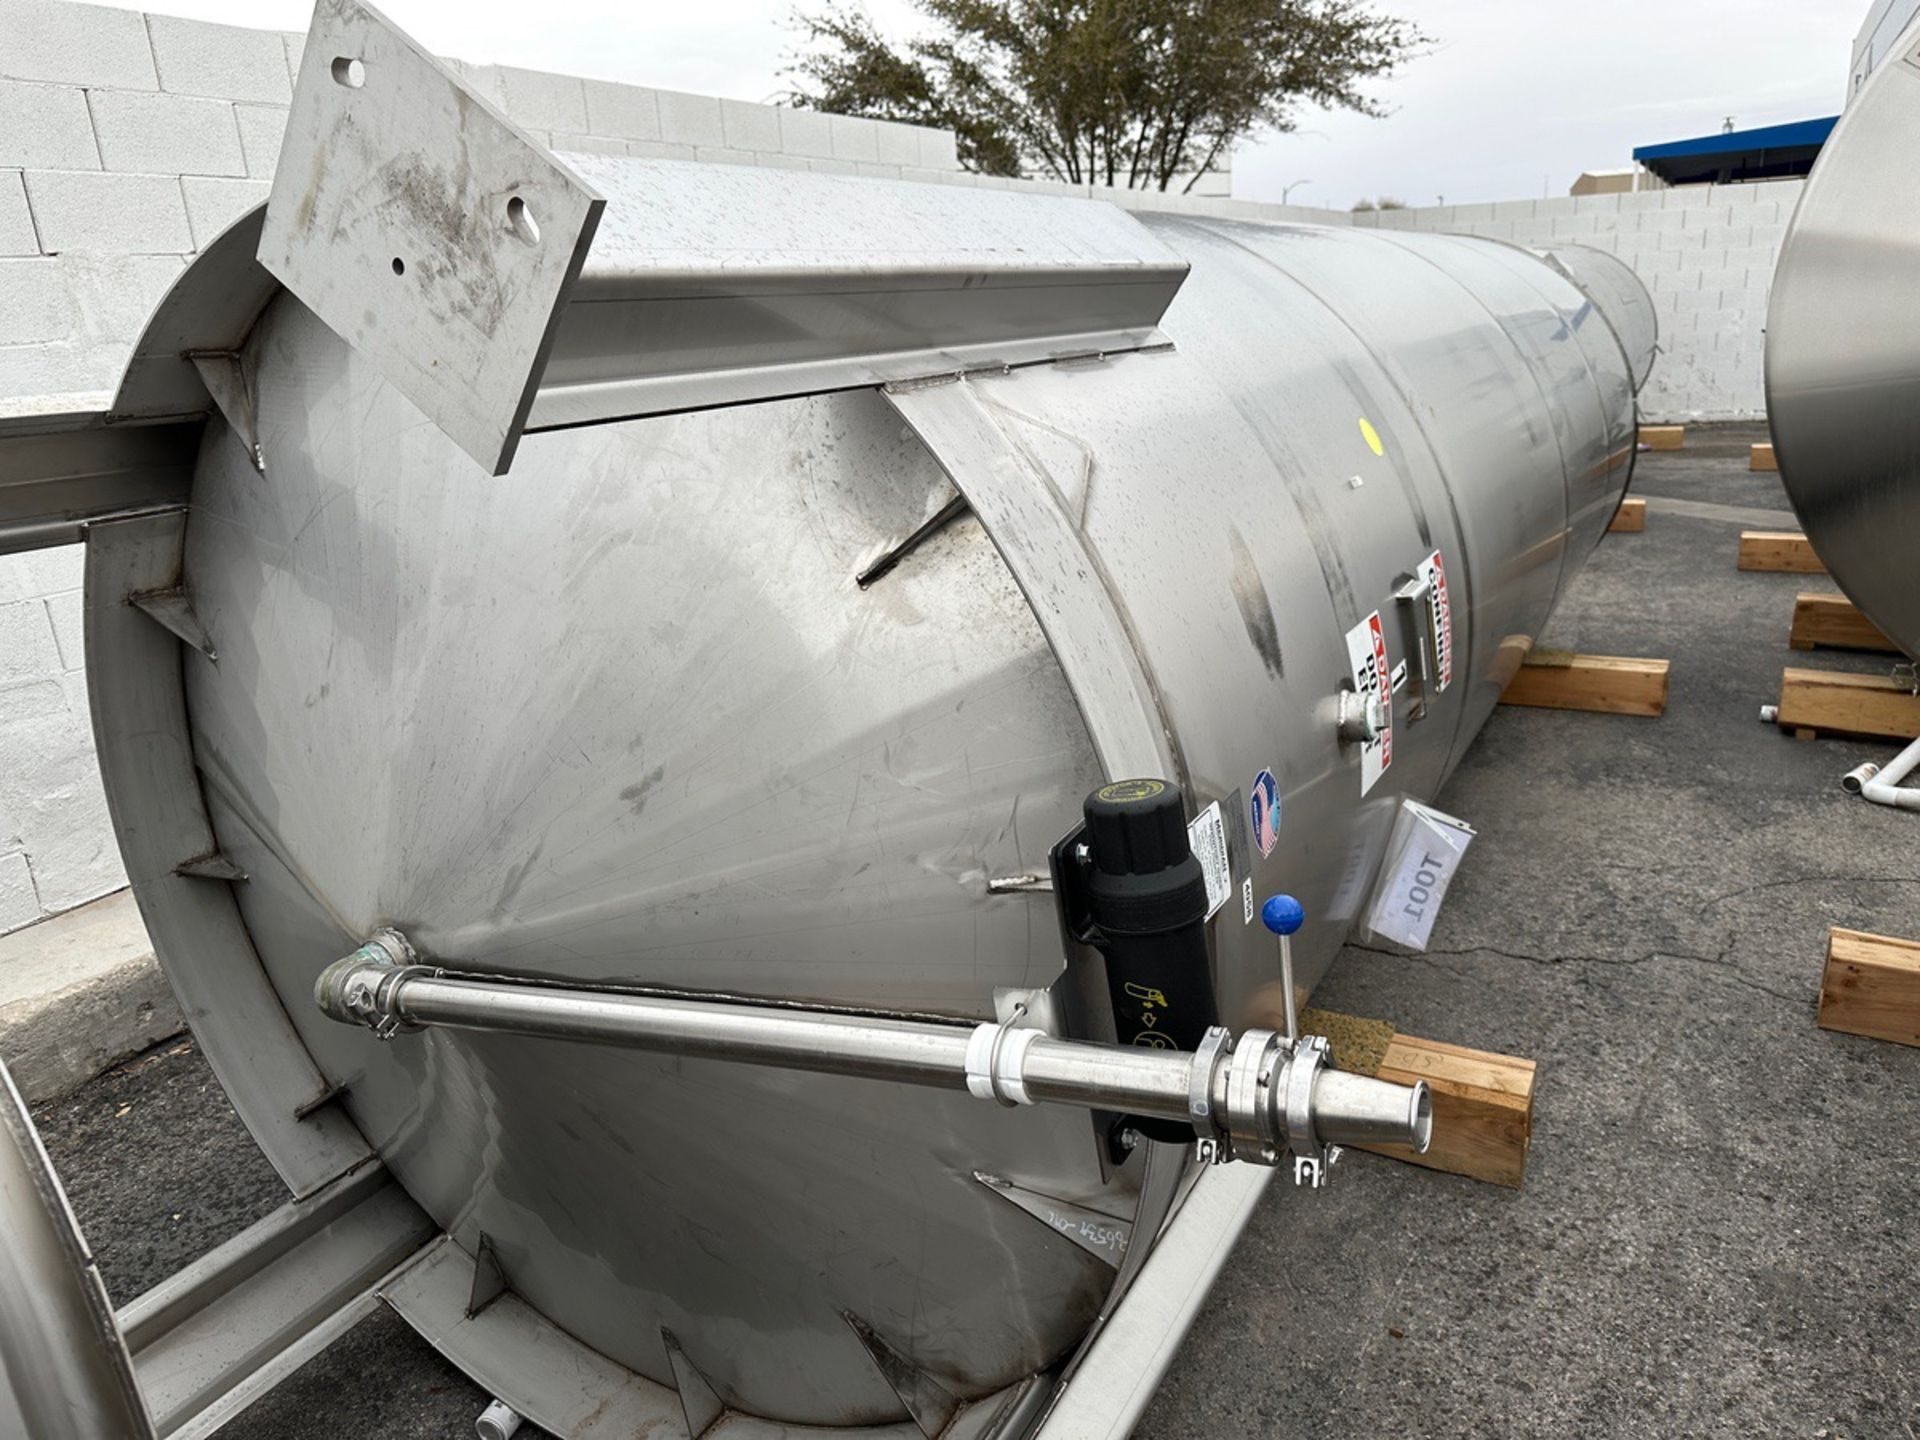 Meridian Stainless Steel Flammable Material Storage Tank, S/N 6763918, WPC Asset 405 | Rig Fee $1200 - Image 5 of 5